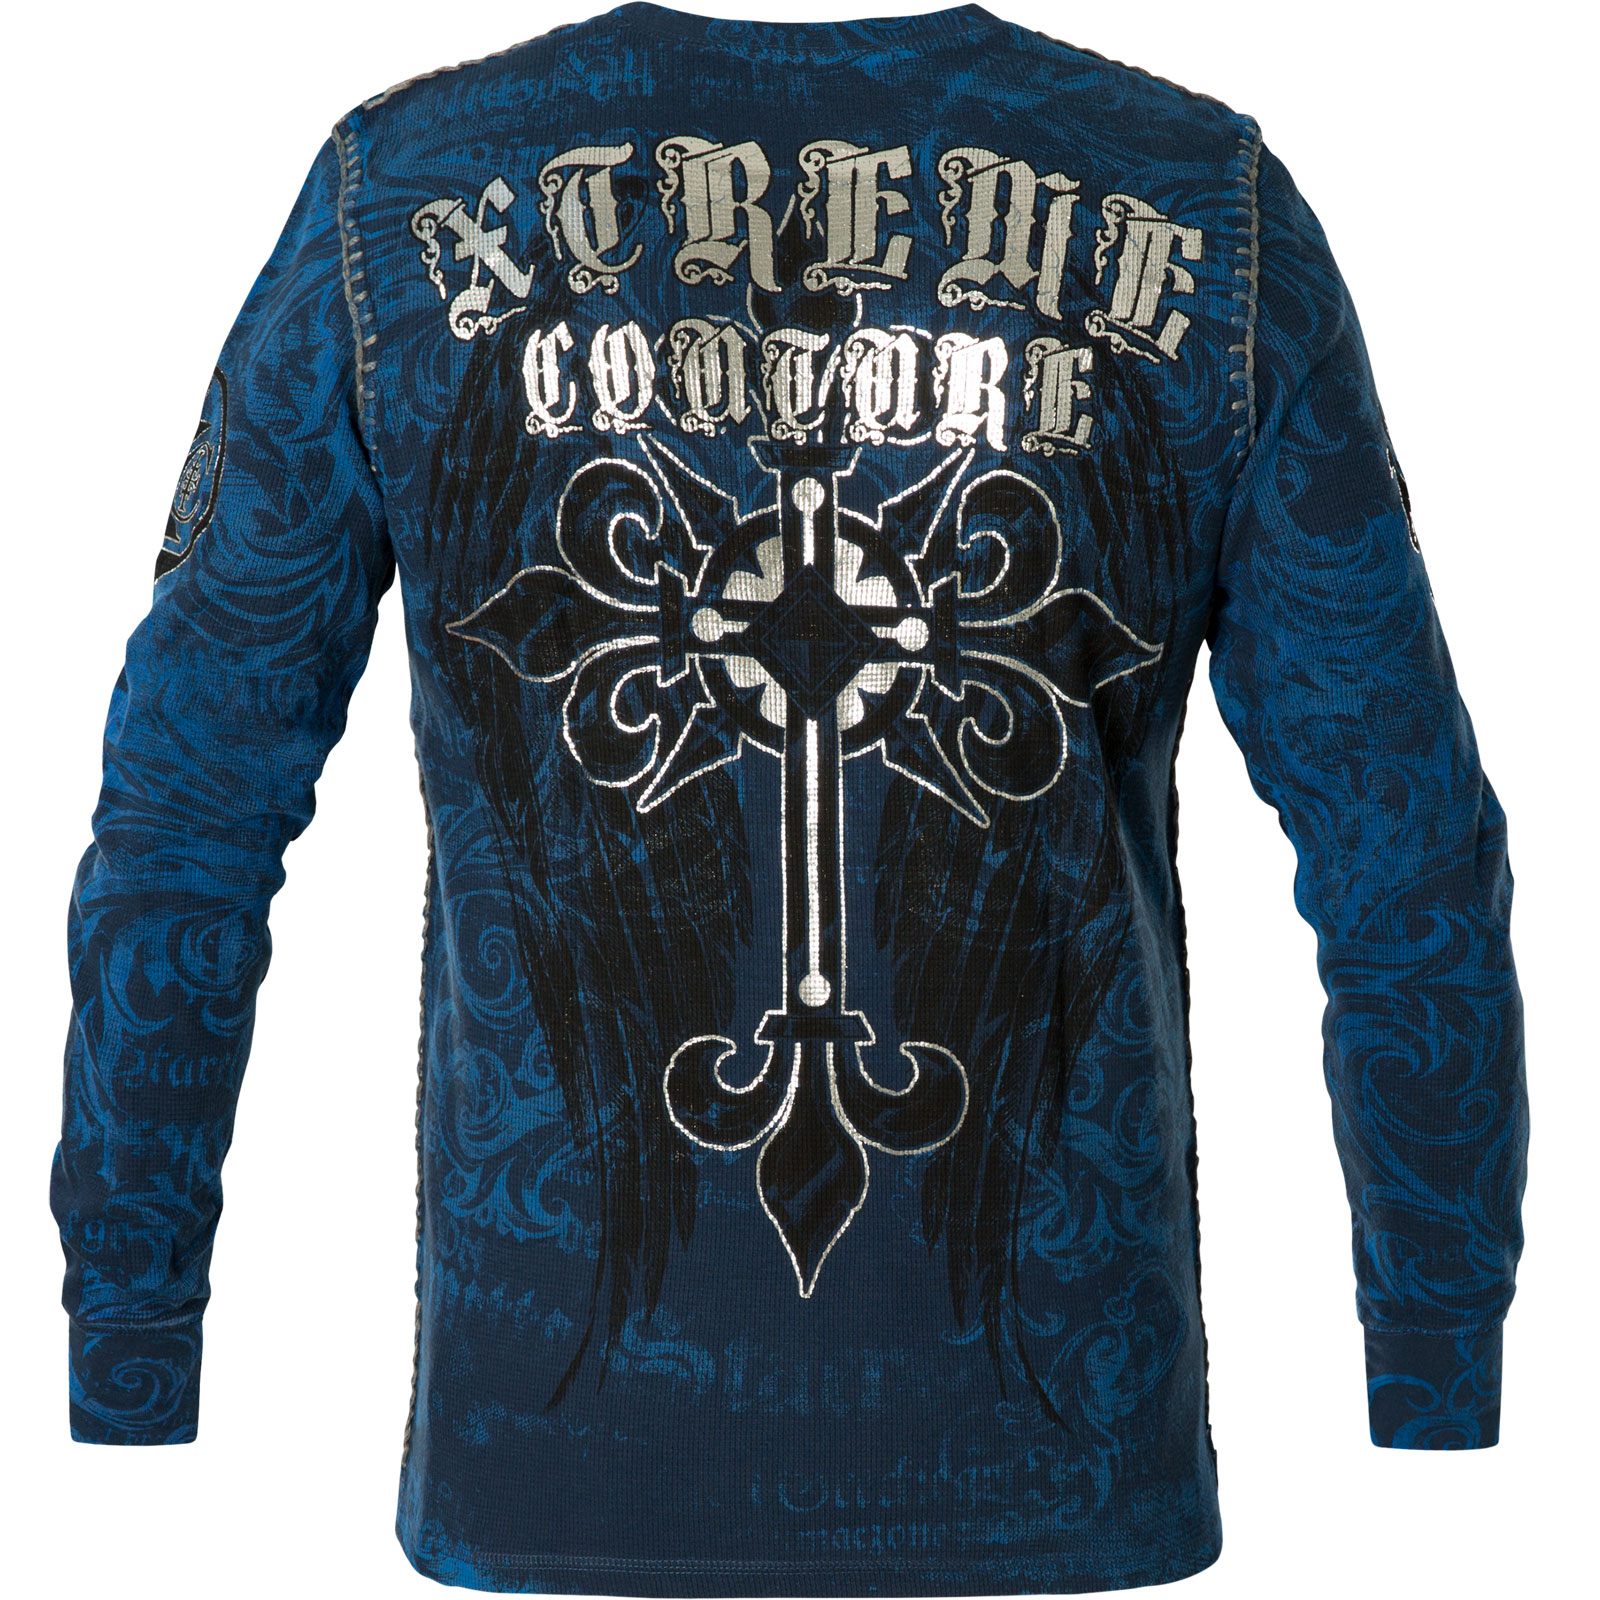 Xtreme Couture by Affliction Thermal Hercules Print with wings and a cross